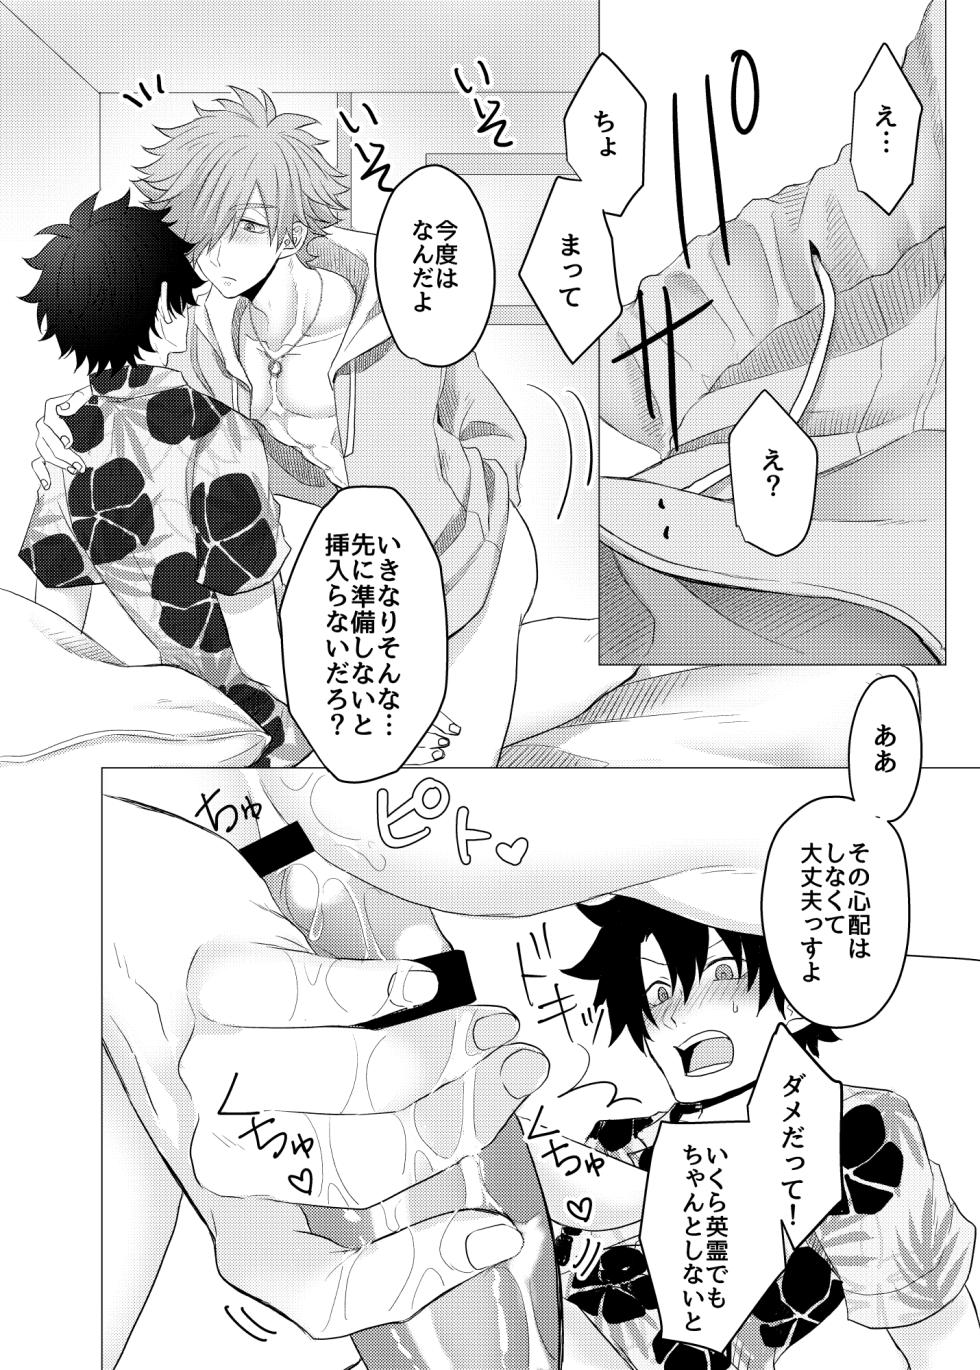 [about (No. 6)] Luluhawa Onii-san to Issho♥ (Fate/Grand Order) [Digital] - Page 13